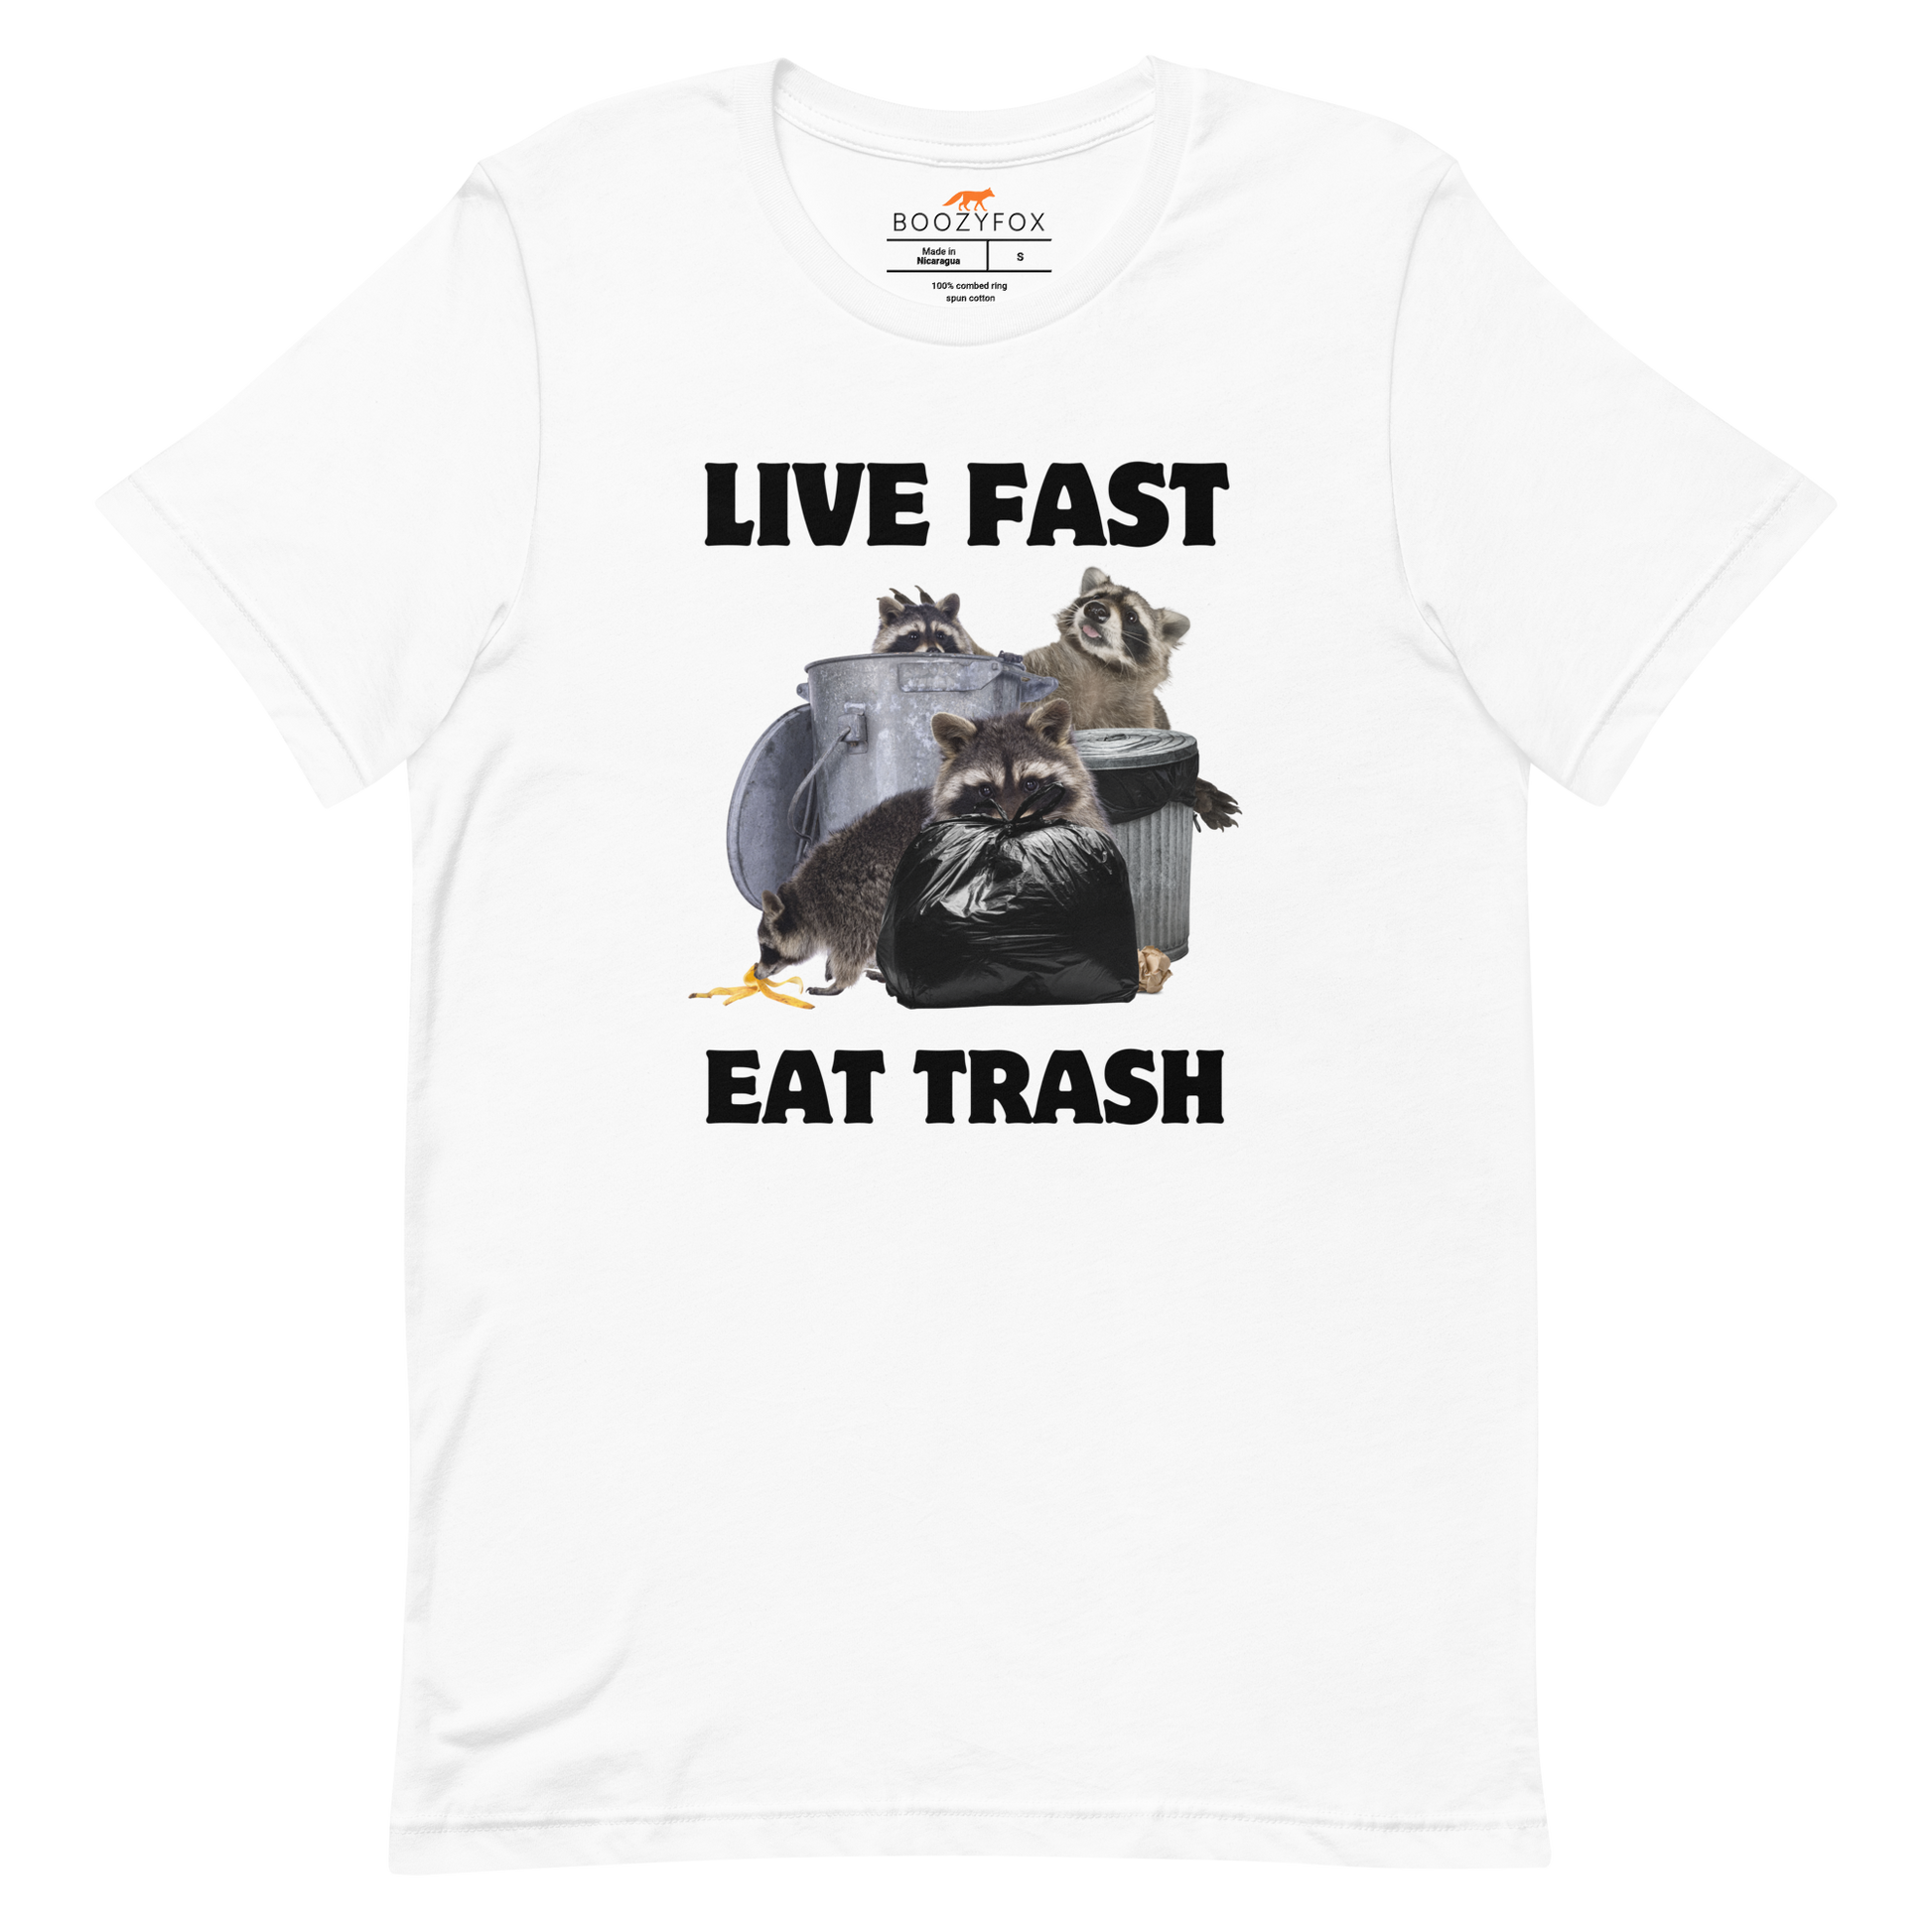 White Premium Raccoon Tee featuring a funny 'Live Fast Eat Trash' graphic on the chest - Funny Graphic Raccoon Tees - Boozy Fox